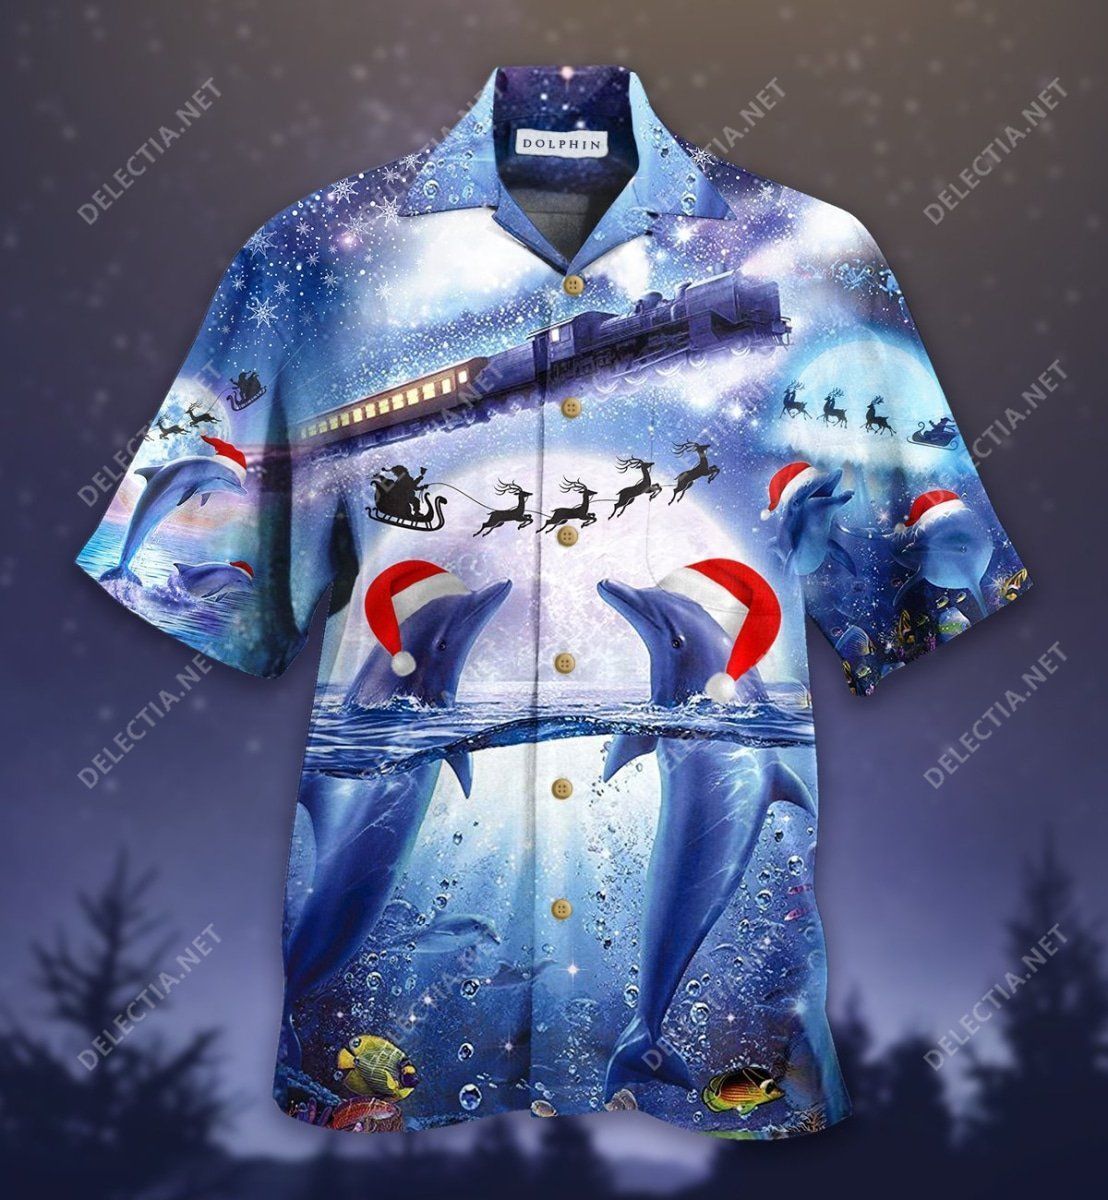 kurobase-all-i-want-for-christmas-is-a-dolphin-hawaiian-shirt-dolphin-gifts-for-her.jpeg